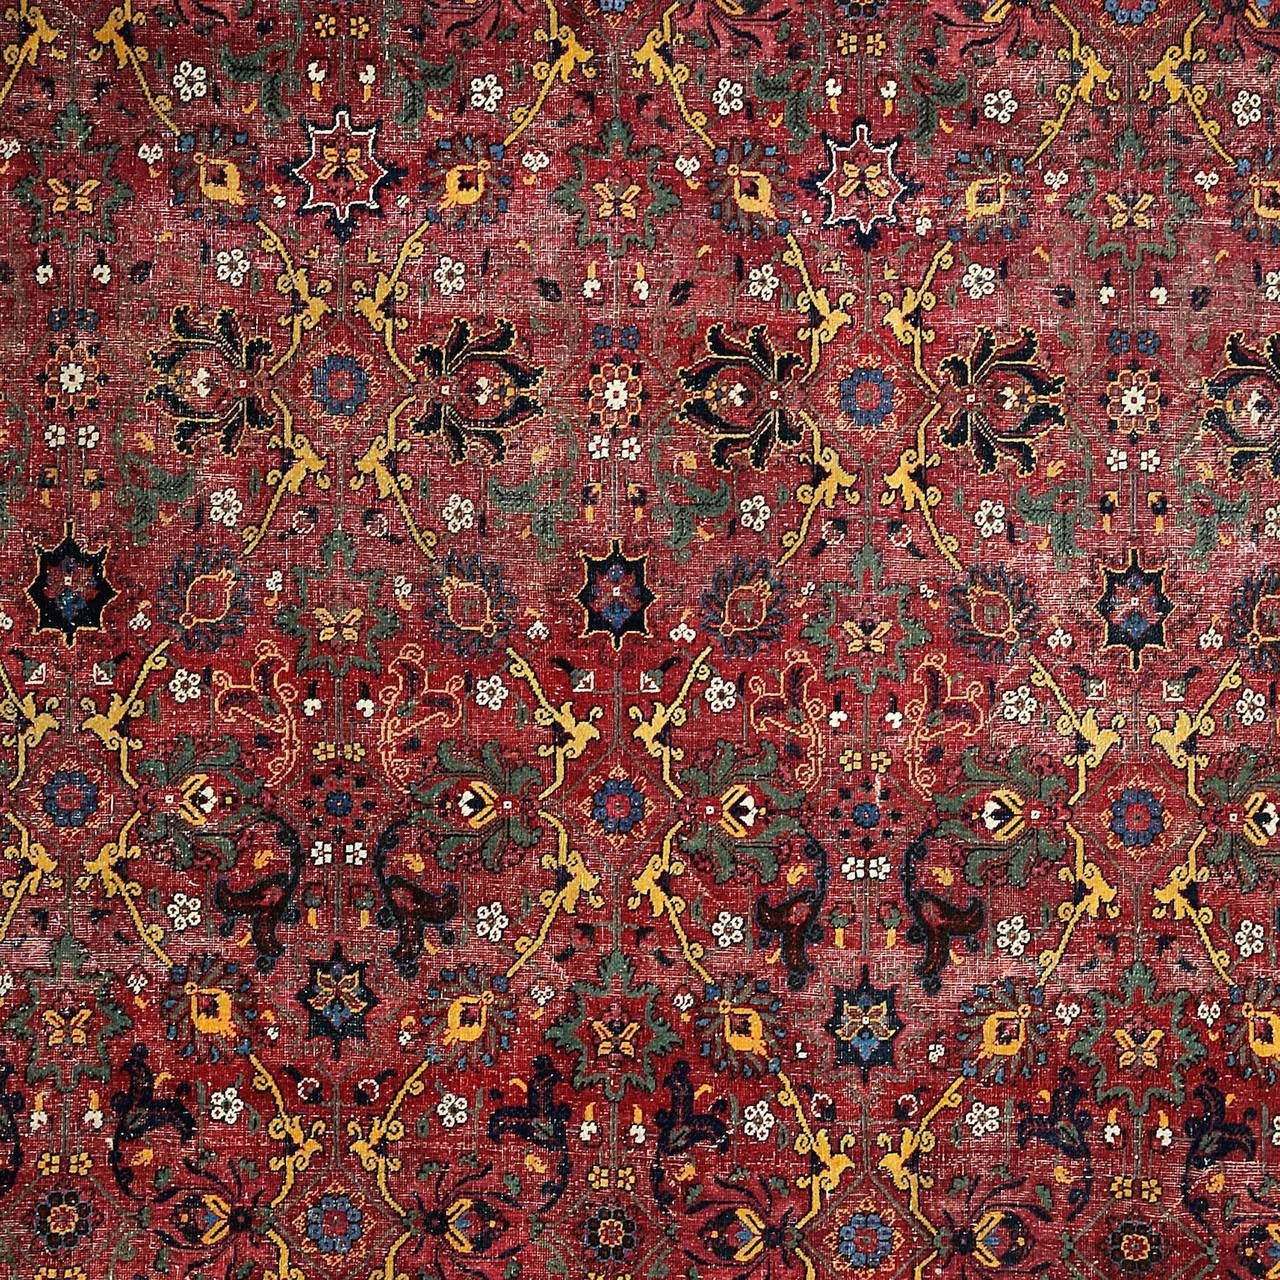 A fine and rare large Mughal carpet, first half of the 18th century.